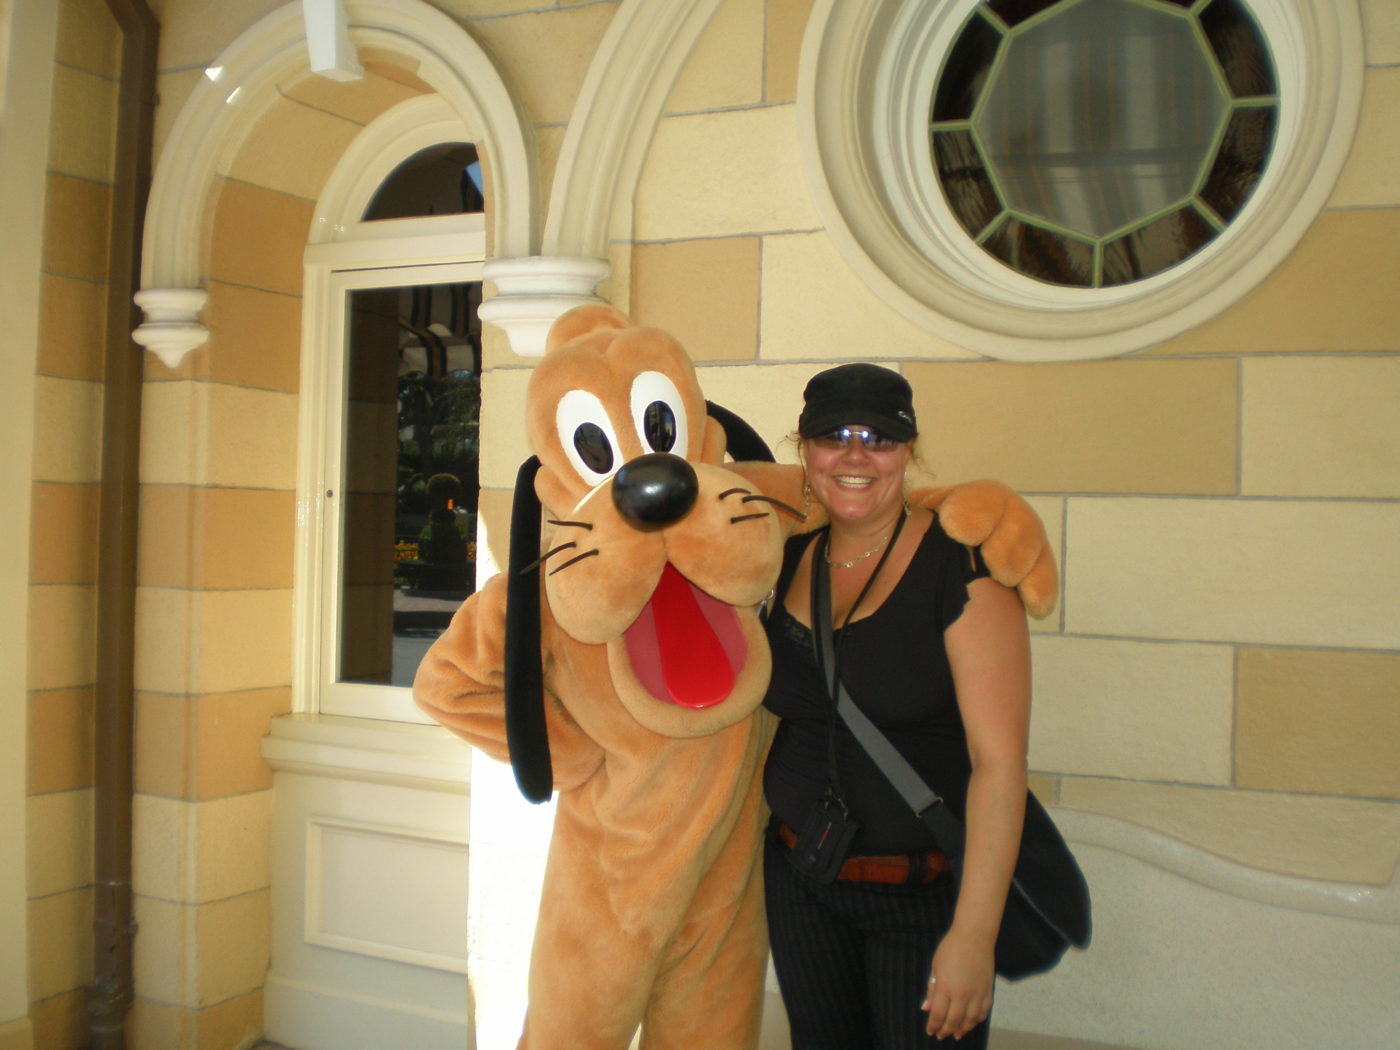 Kathryn Comeau Wong Visiting Pluto